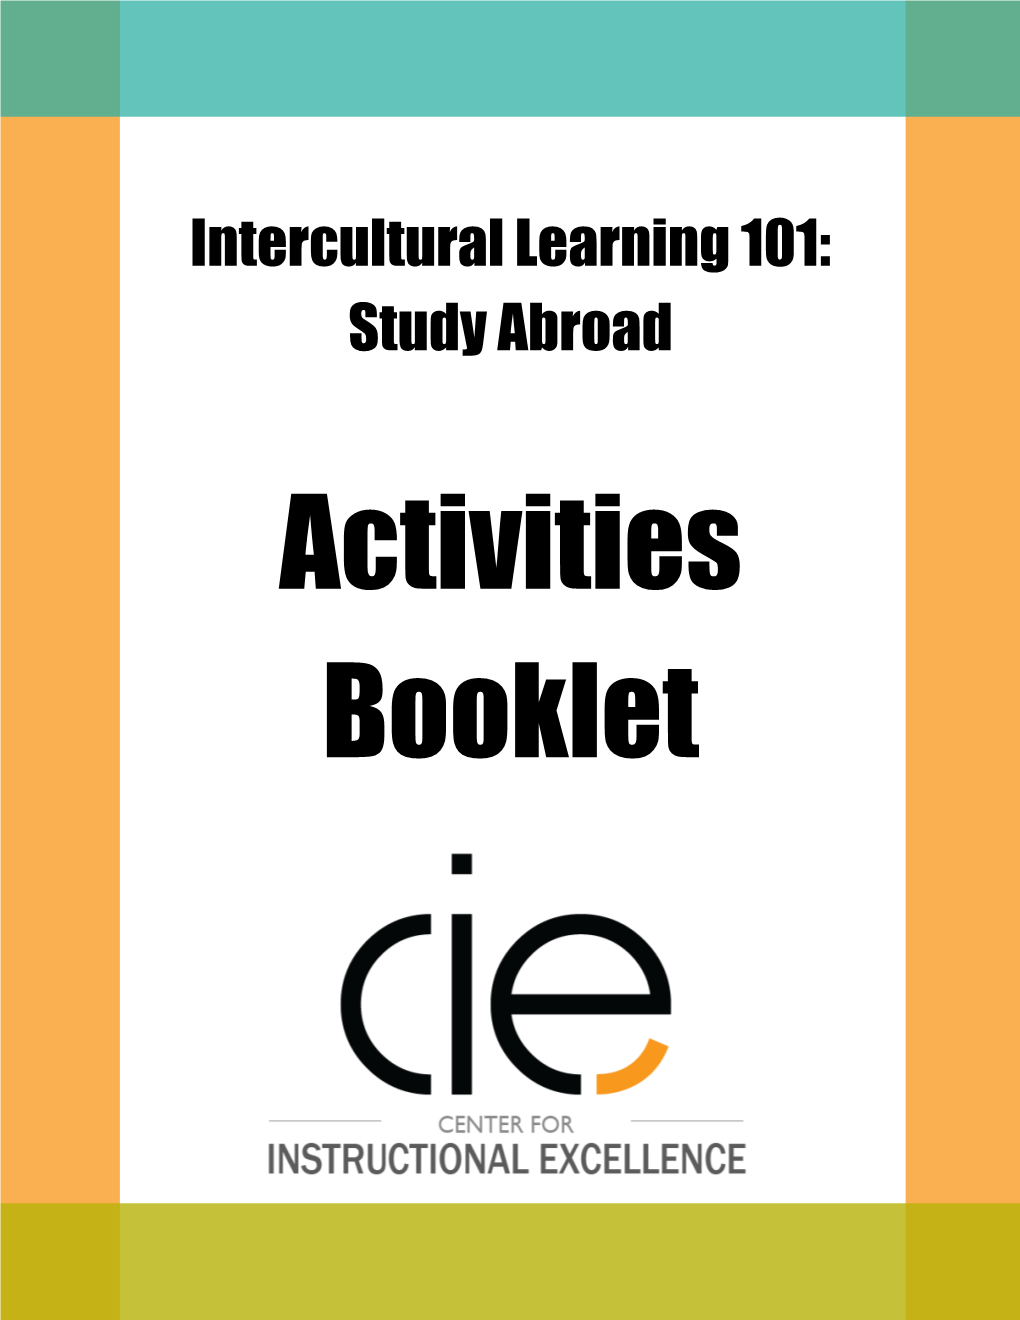 Intercultural Learning 101: Study Abroad